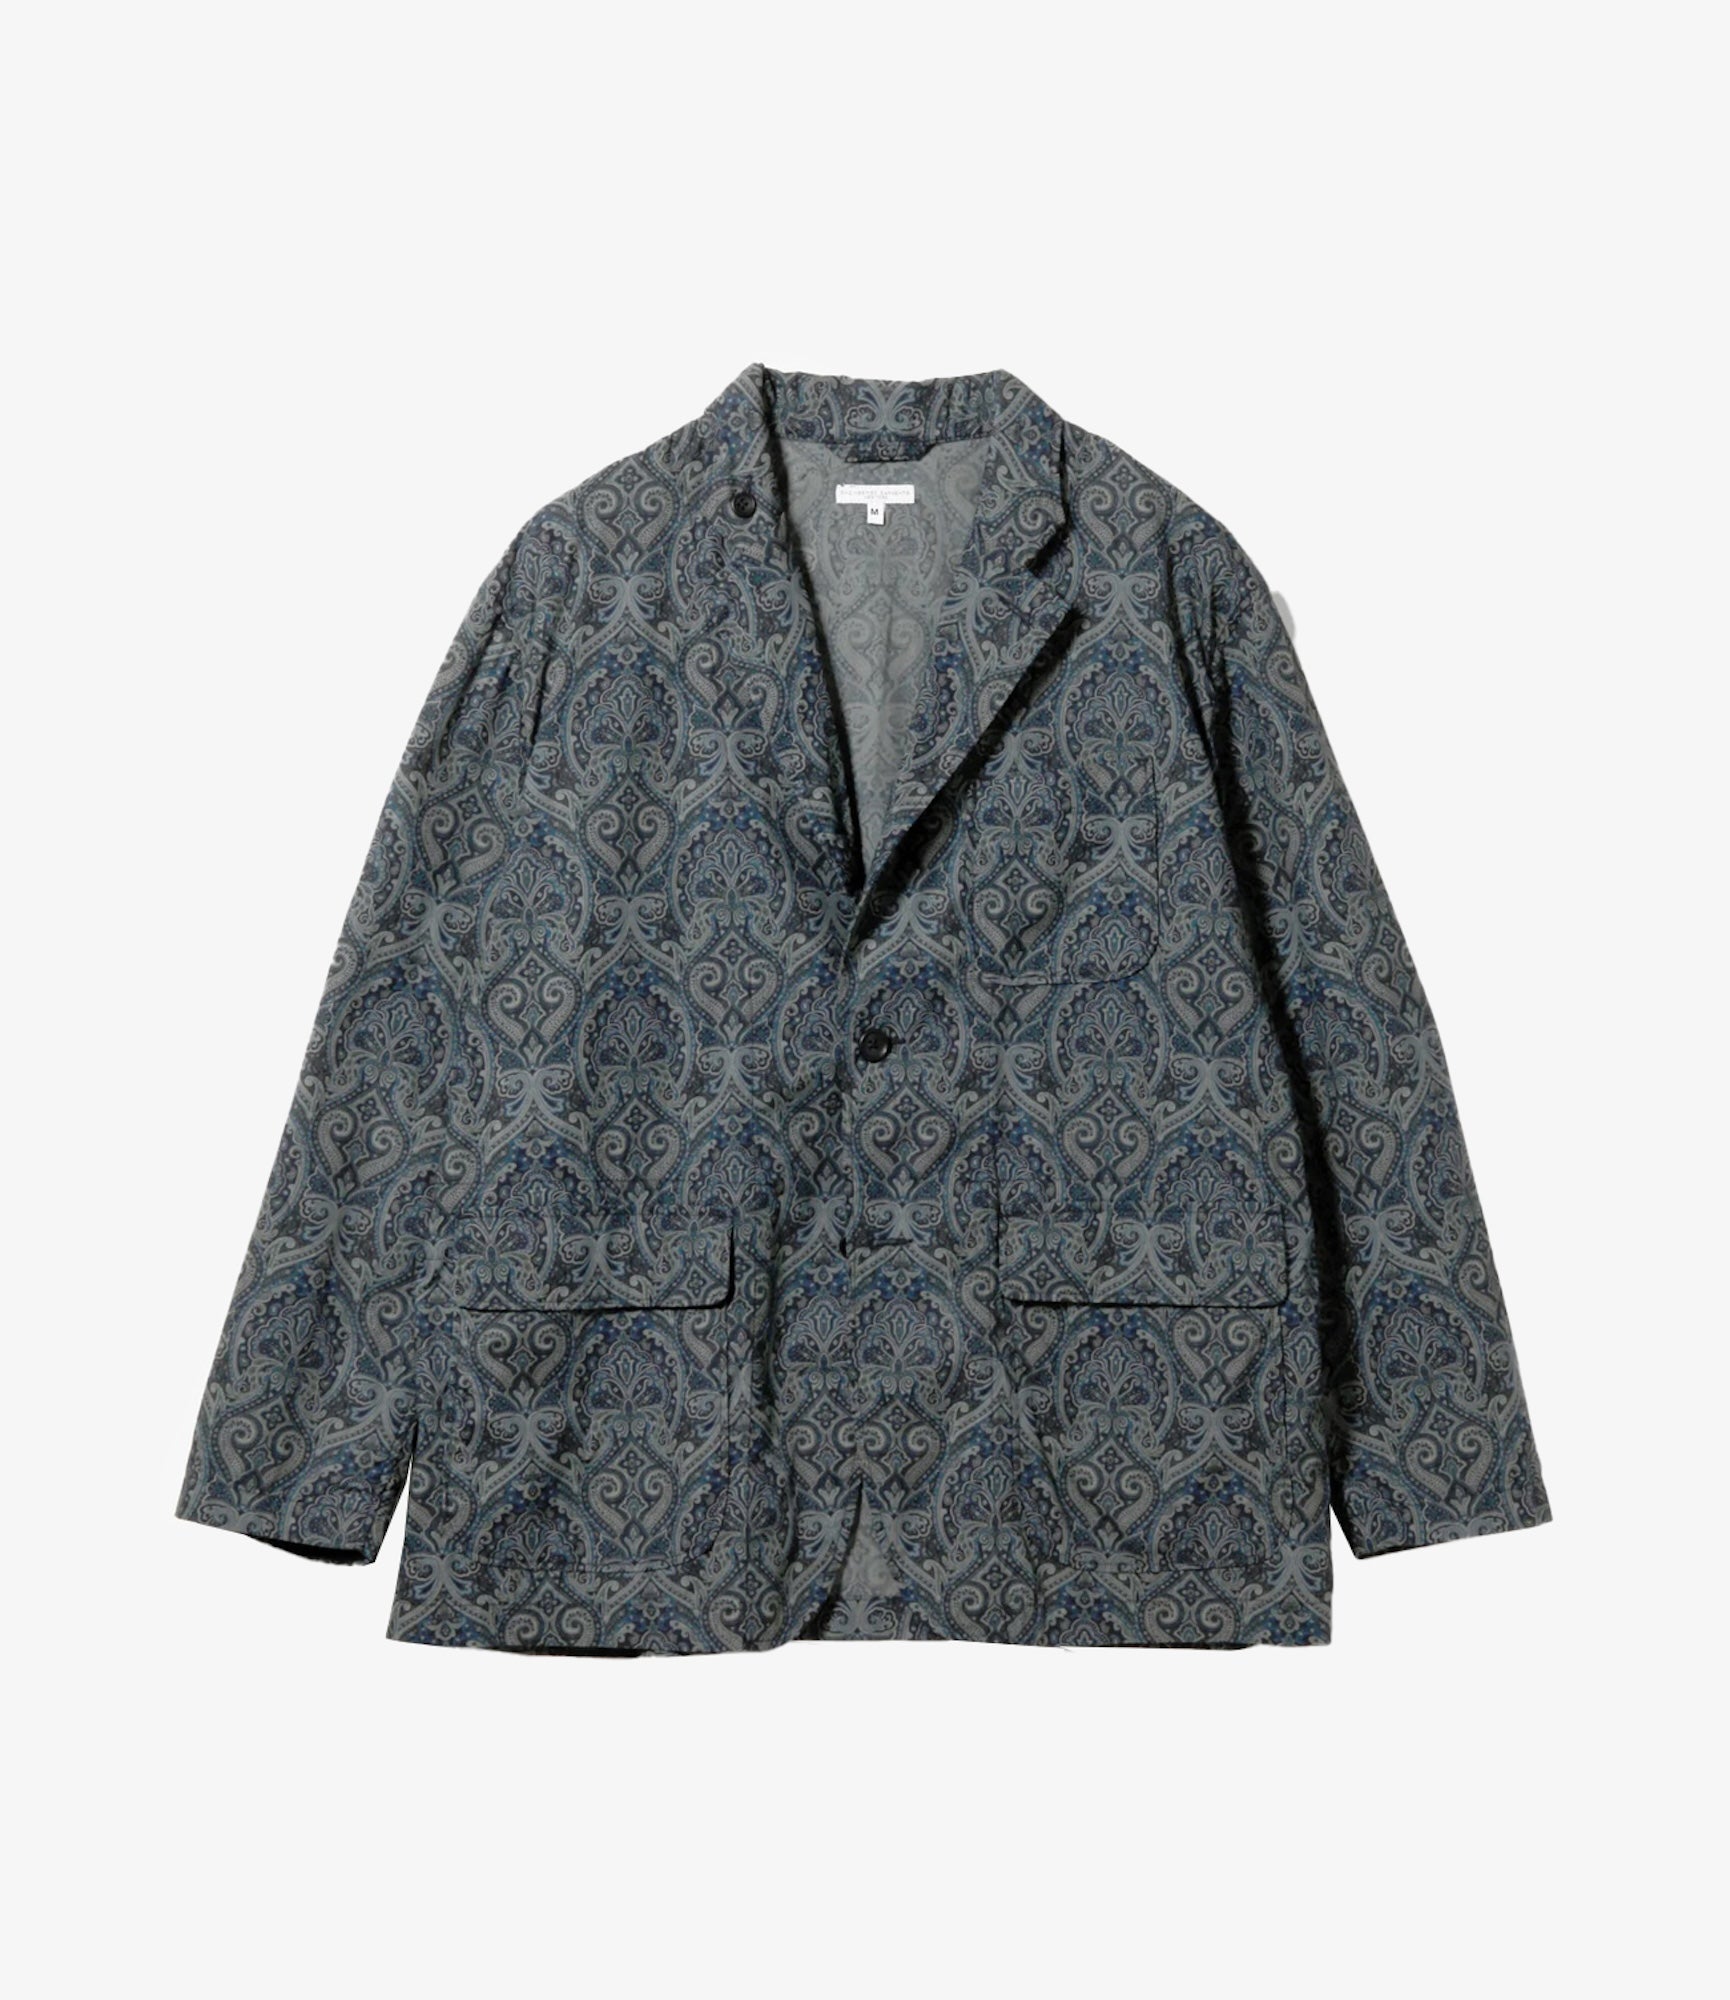 Shop Engineered Garments Clothing | Nepenthes London